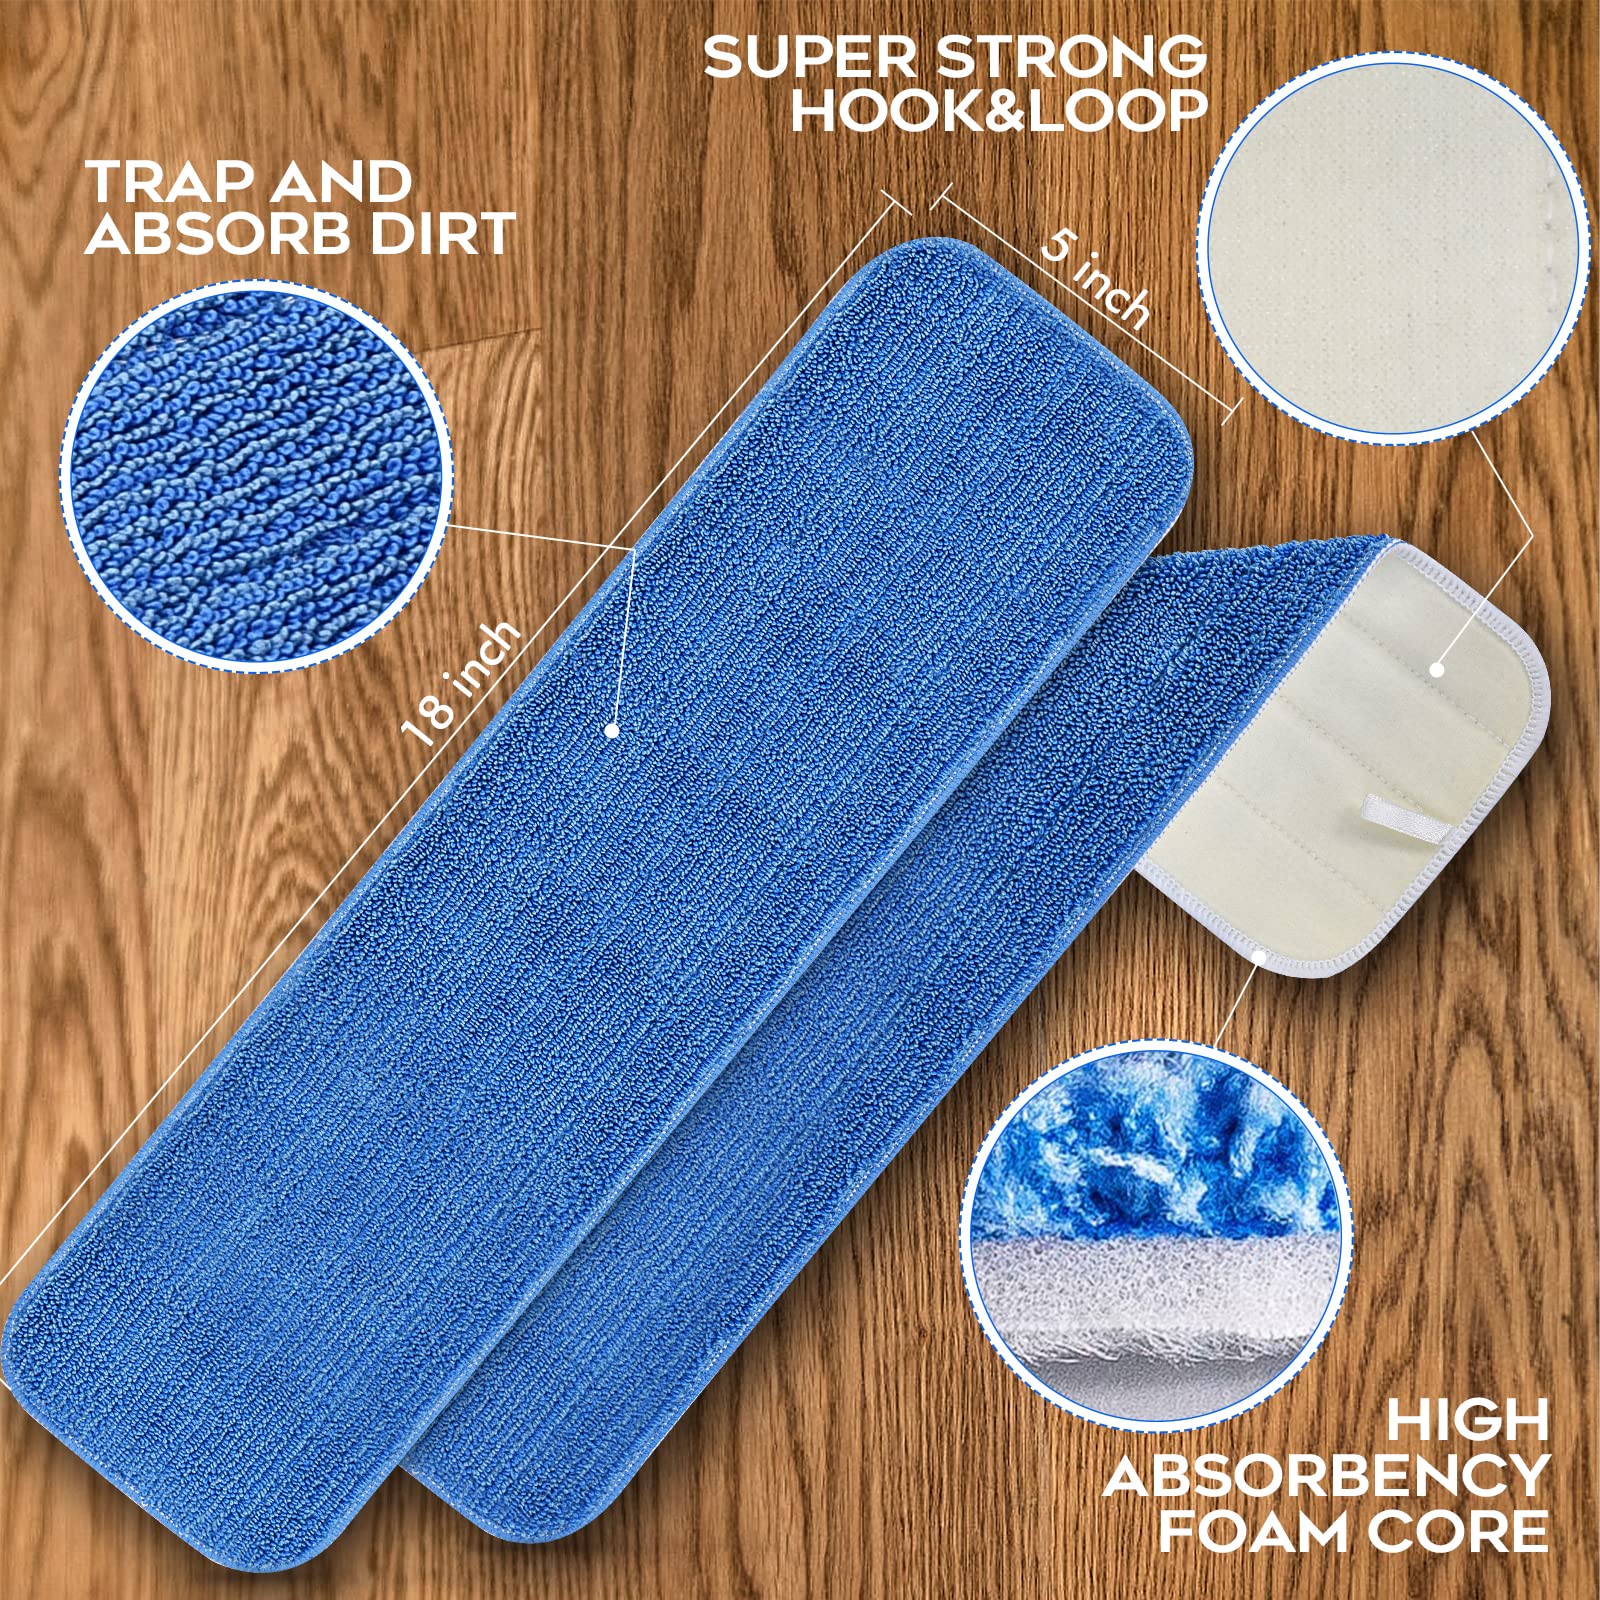 Matthew 18'' Microfiber Spray Mop Replacement Pads Heads for Wet Dry Reusable Mops Floor Home Commercial Cleaning Refills, Machine Washable Fits Compatible with Bona Mop&Most Spray Mops Blue (6 Pack)